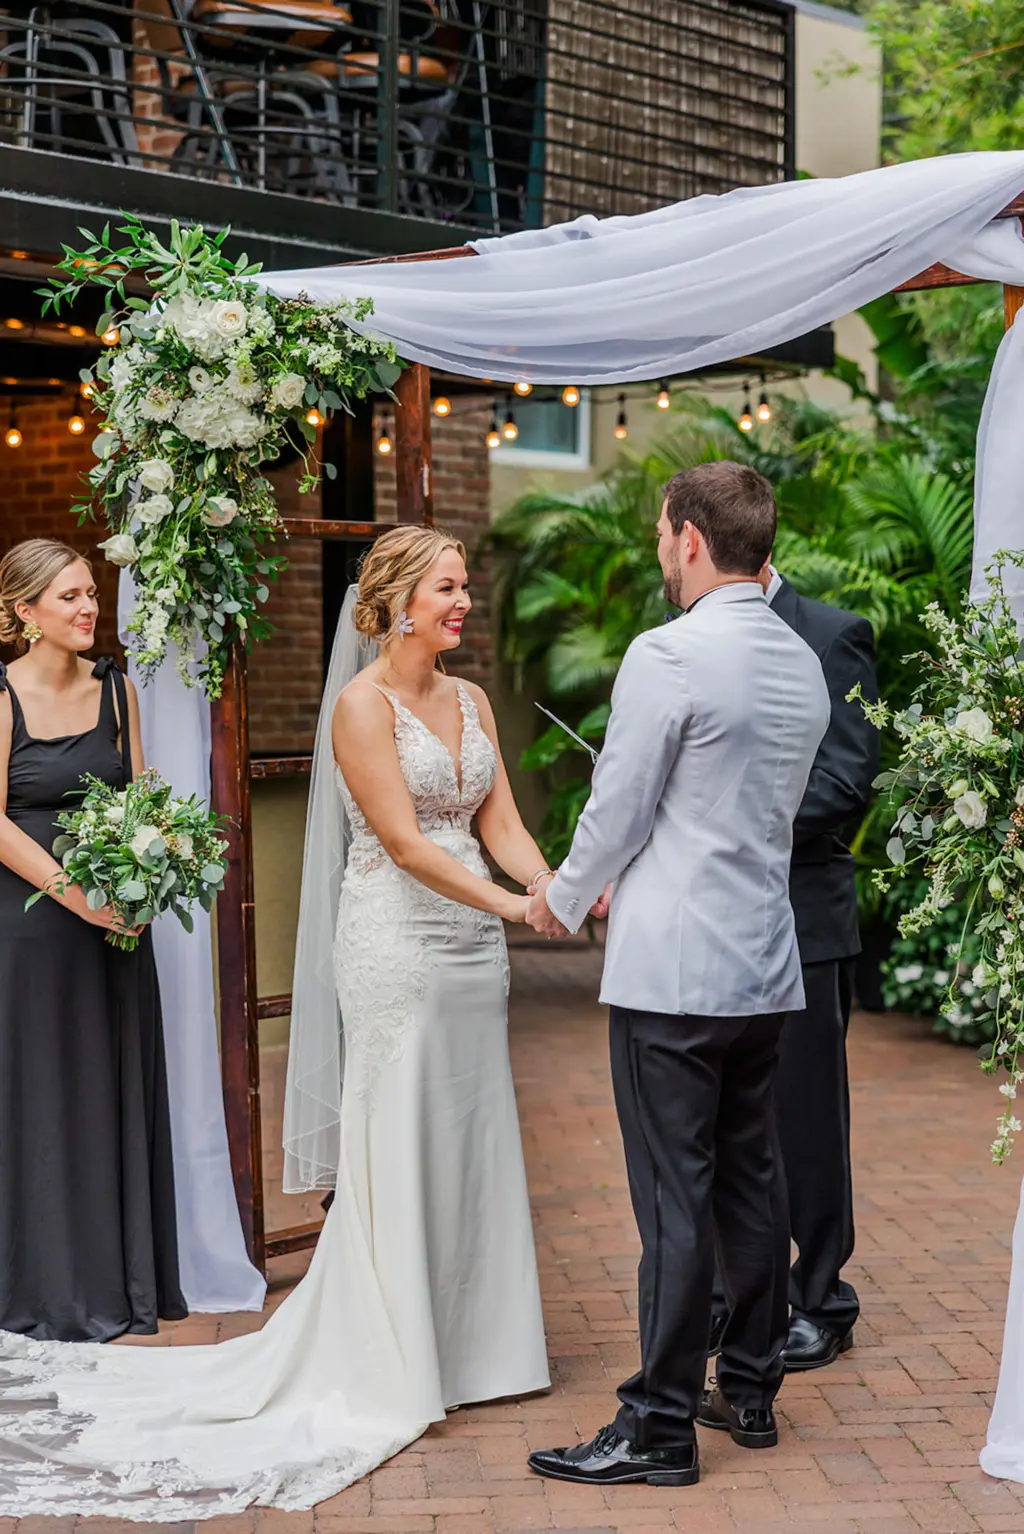 Bride and Groom Vow Exchange | White Drapery with White Hydrangeas, Roses, Veronicas, and Greenery Wedding Ceremony Arch Decor Inspiration | Tampa Bay Rental Company A Chair Affair